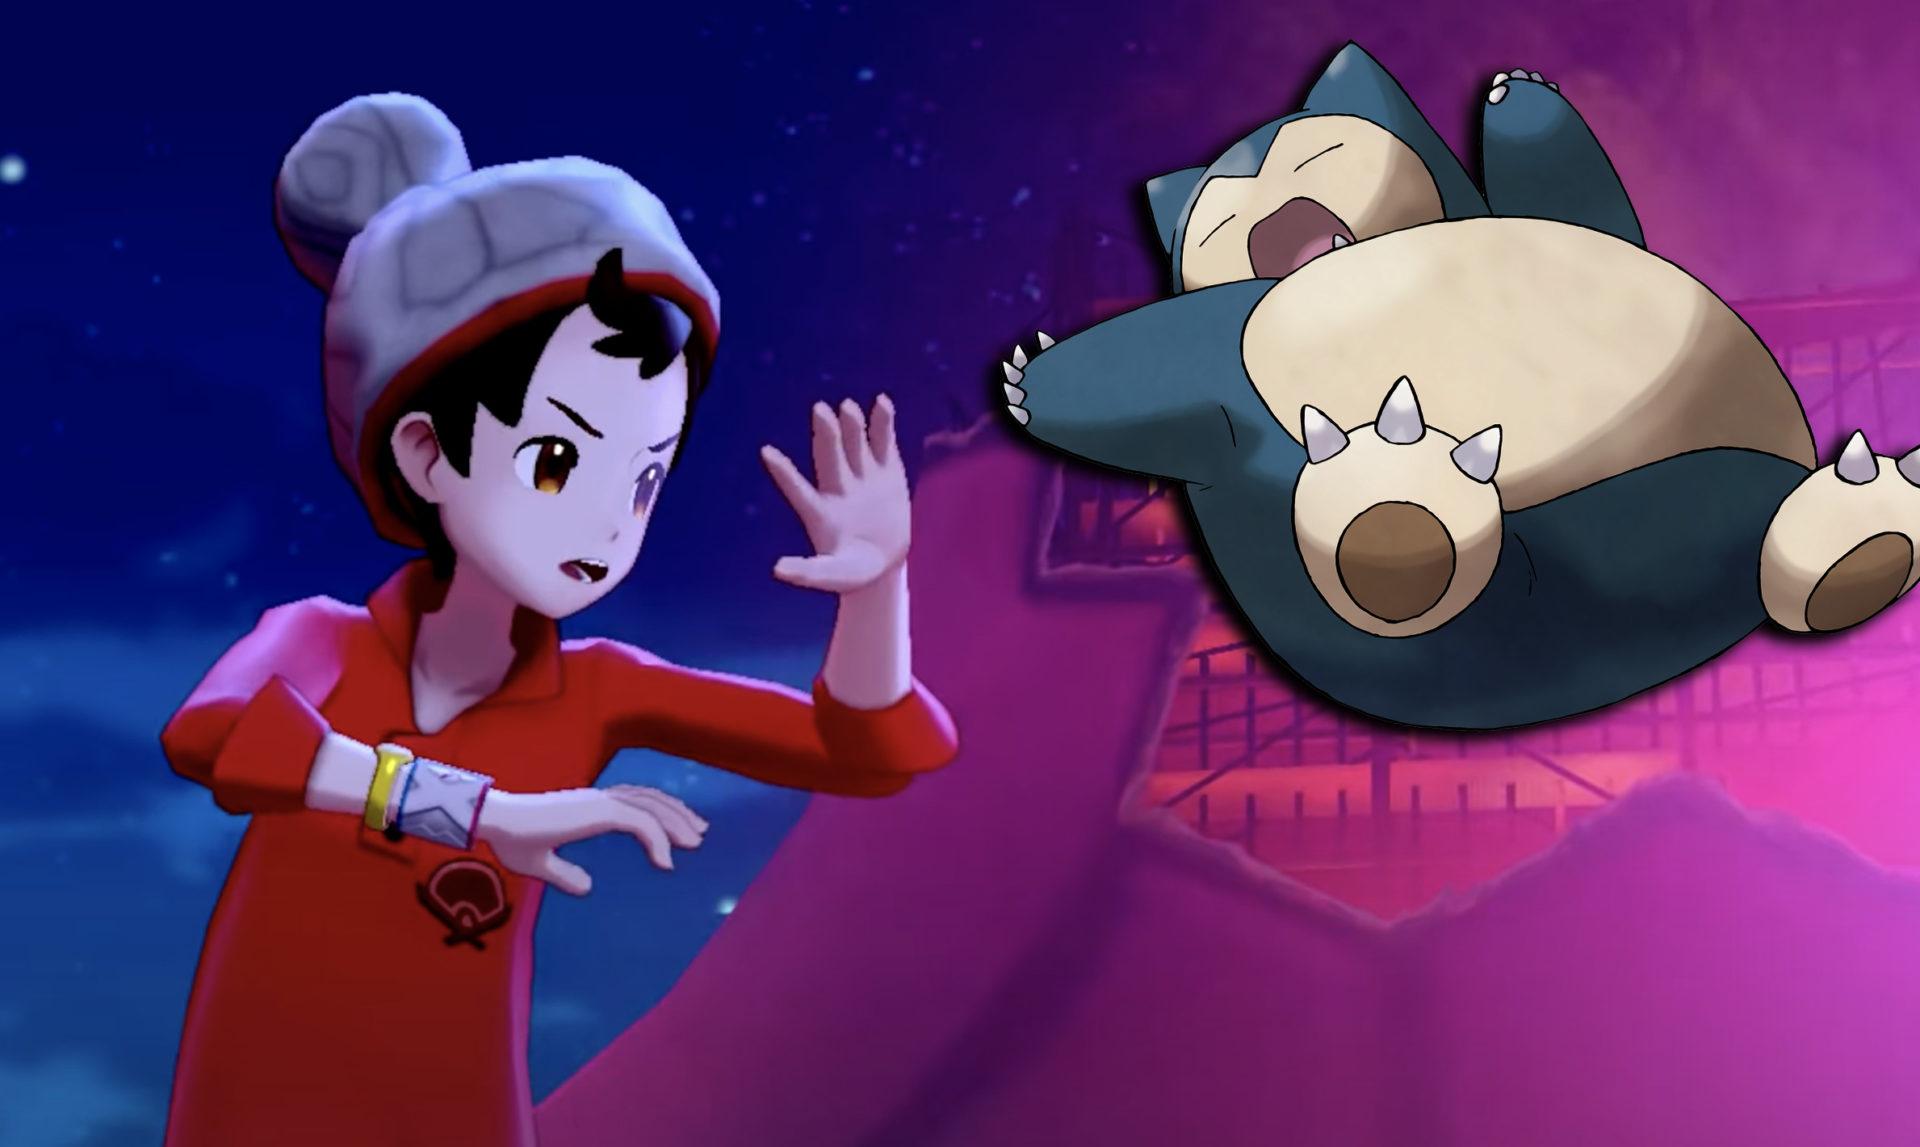 Screenshot from Pokemon Sword & Shield with flying Snorlax.